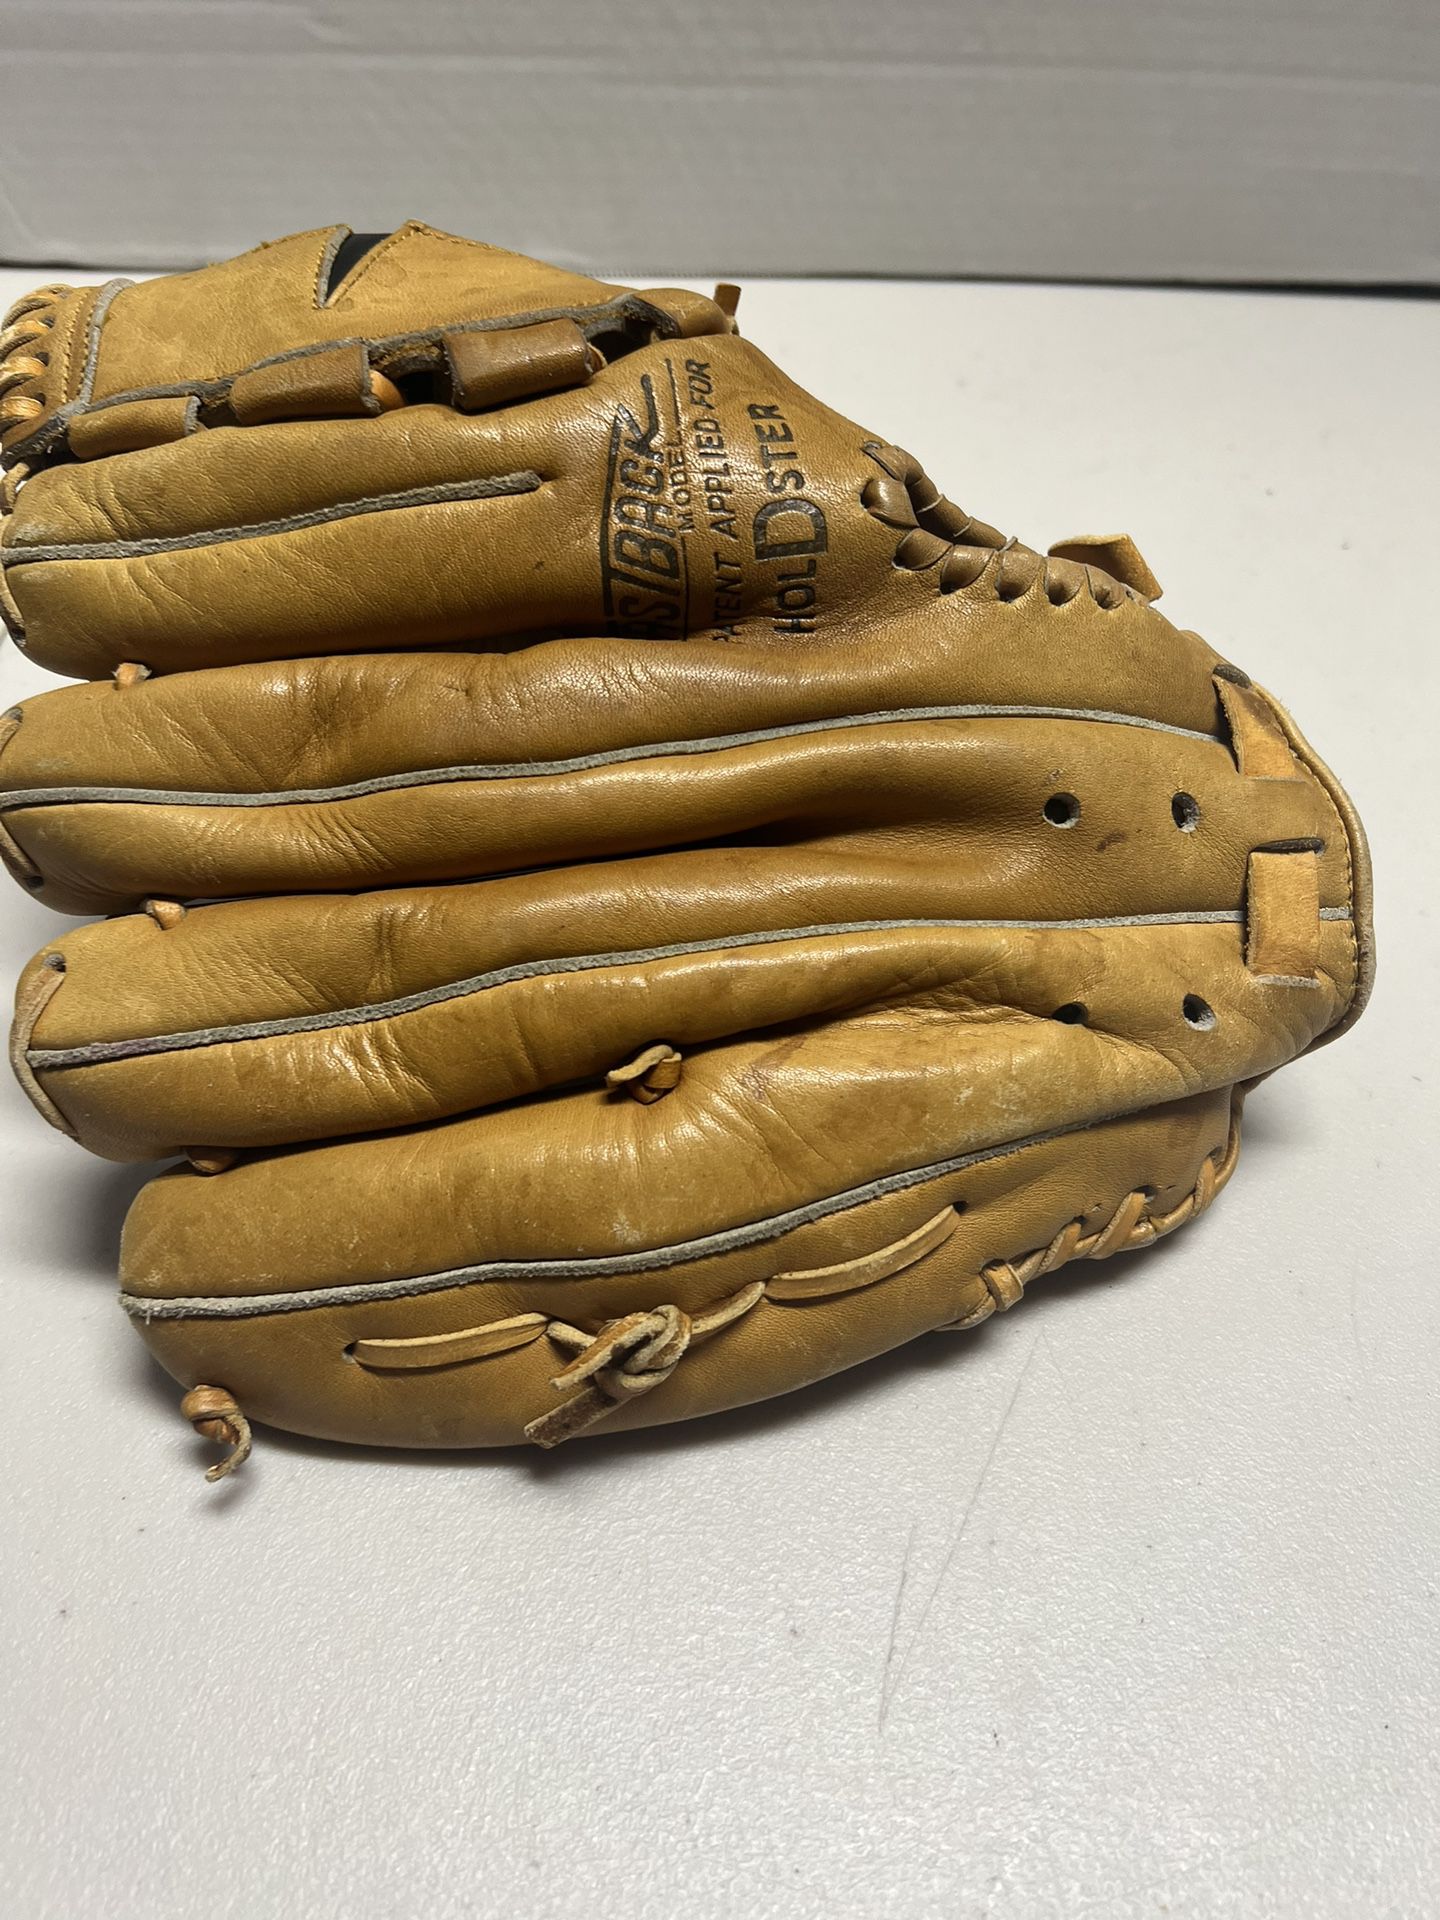 Vintage Rawlings Bobby Knoop Fastback GJF8 Baseball Glove Mitt  RHT Right Hand Throw. Glove is in good condition and looks like it’s intended for smal